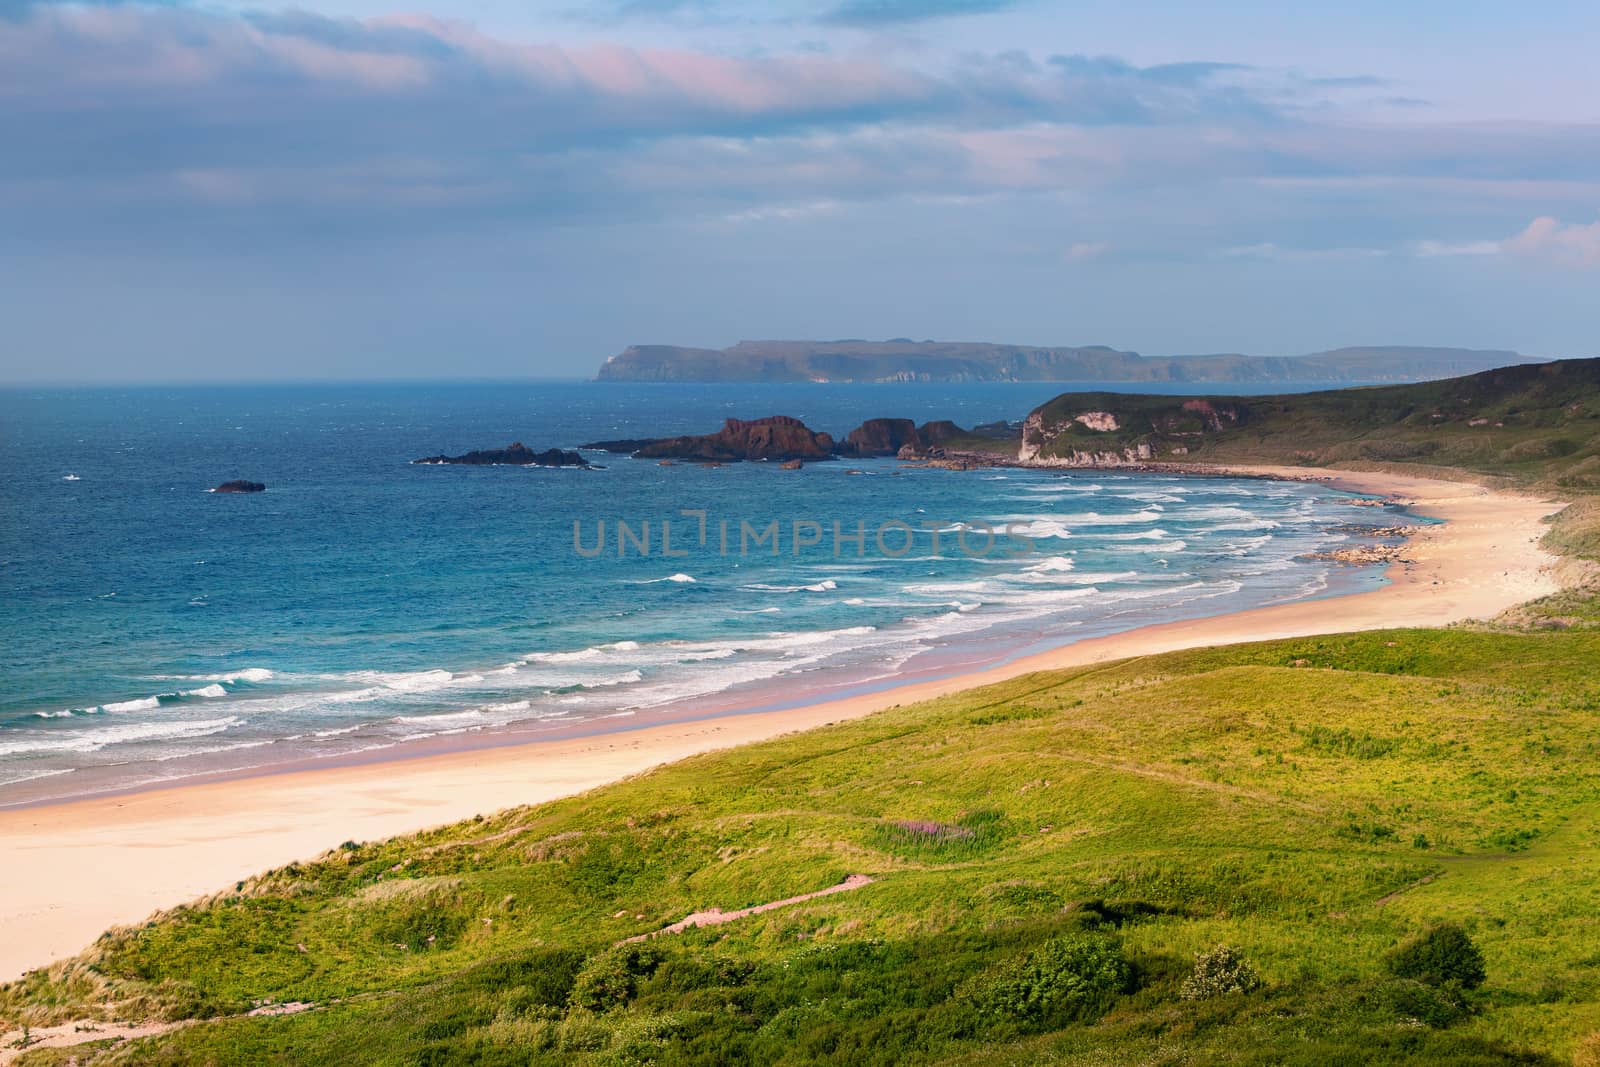 panoramic view of White Park Bay near Ballycastle, County Antrim along the Giants Causeway Coastal Route, Northern Ireland